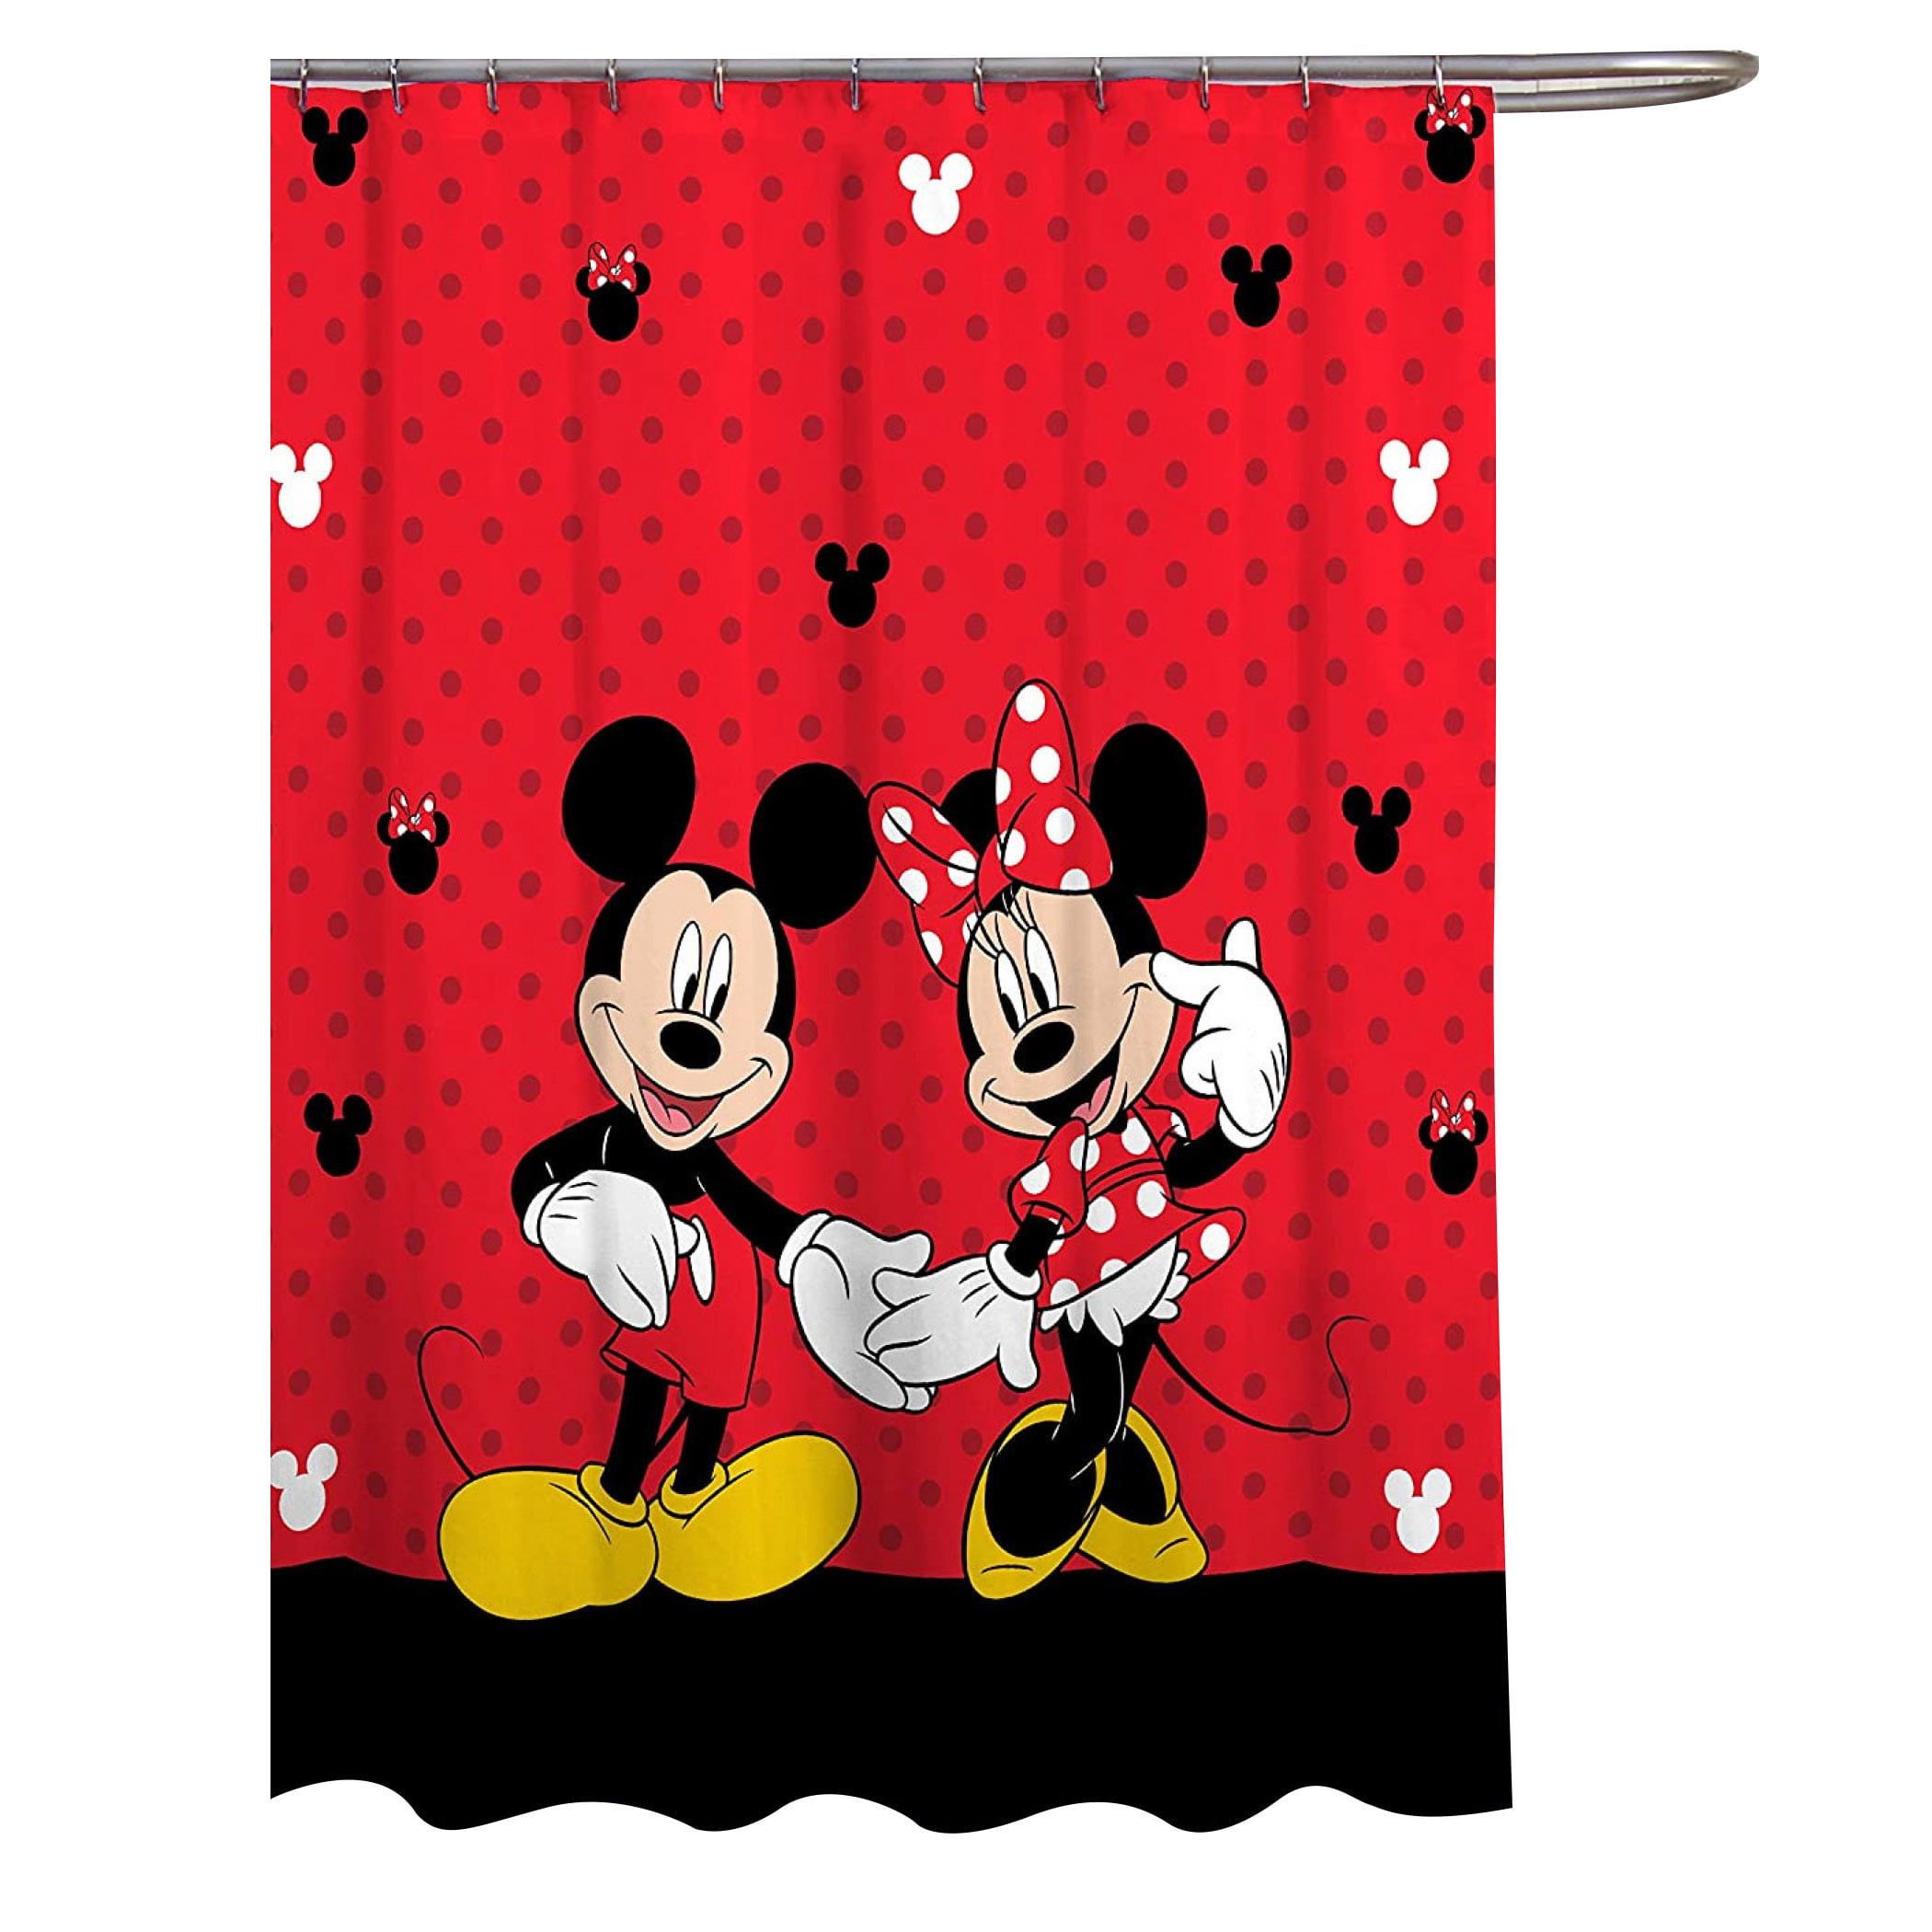 New Disney’s Mickey Mouse Cotton Fabric Shower Curtain 72”x72” Minnie Ears 